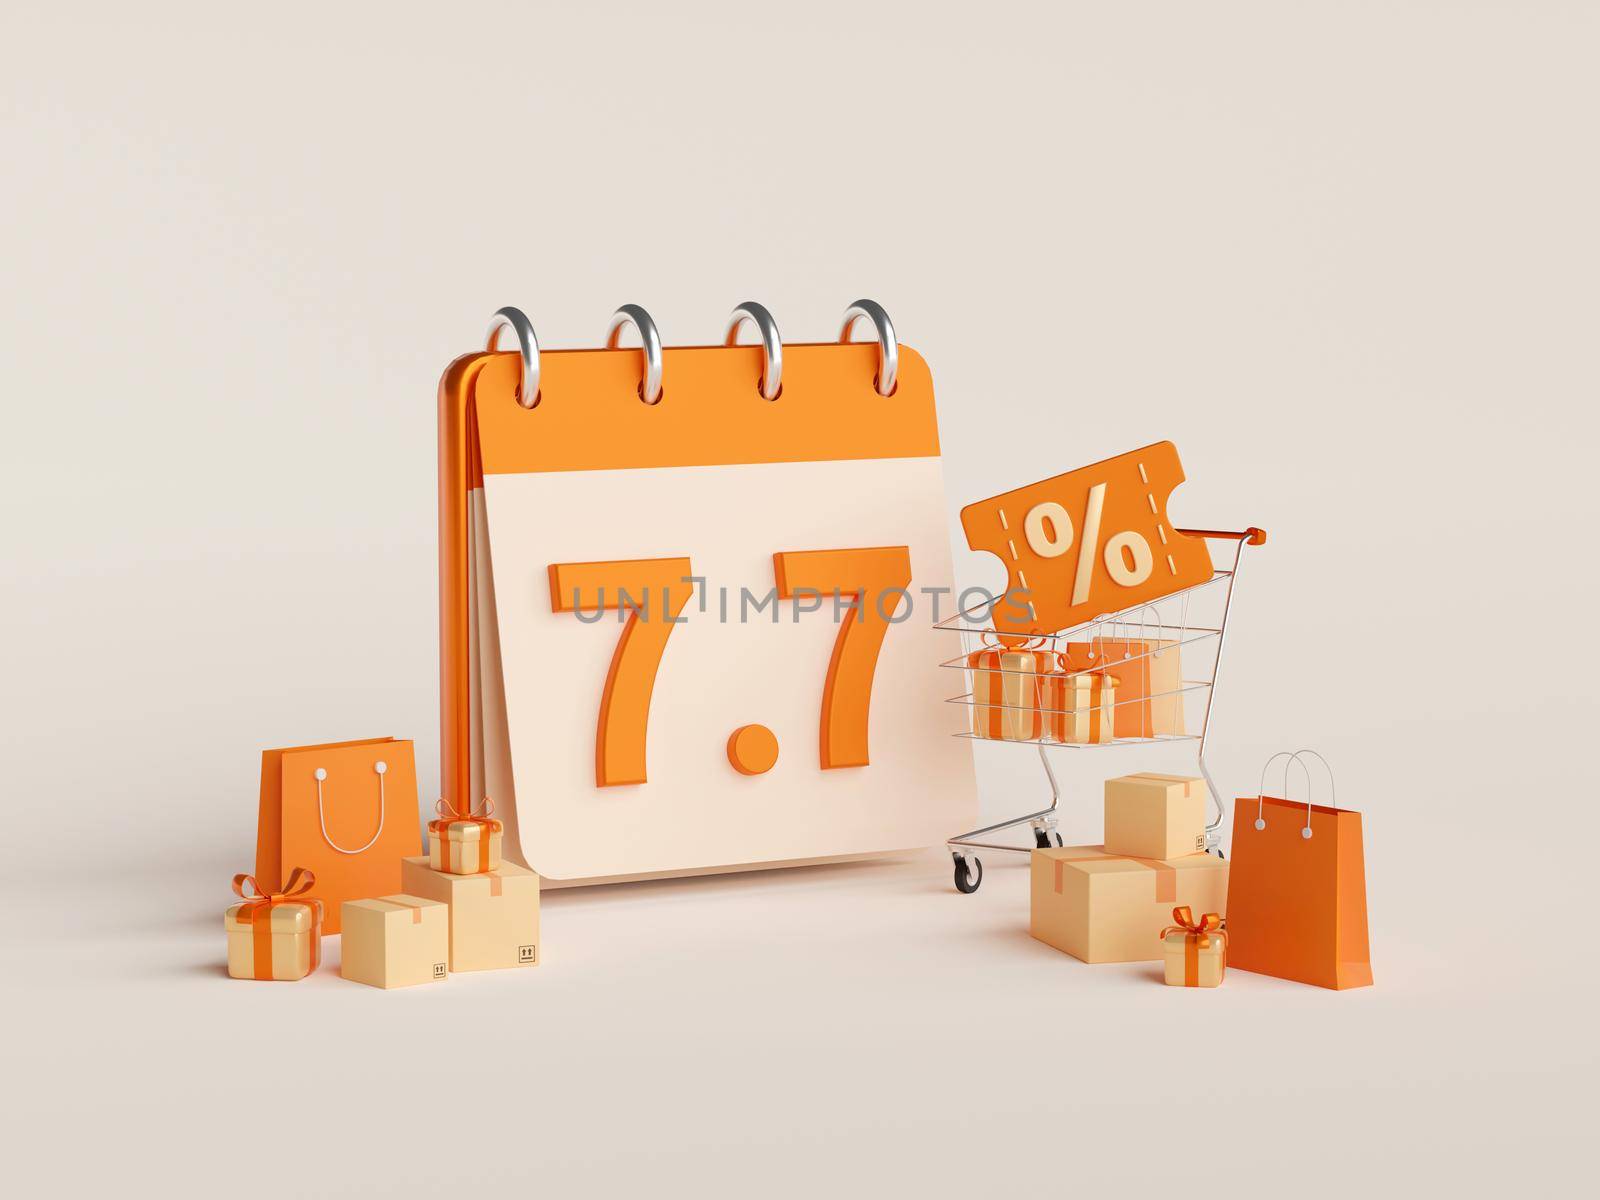 3d illustration of Promotion deal 7.7 with discount price for shopping